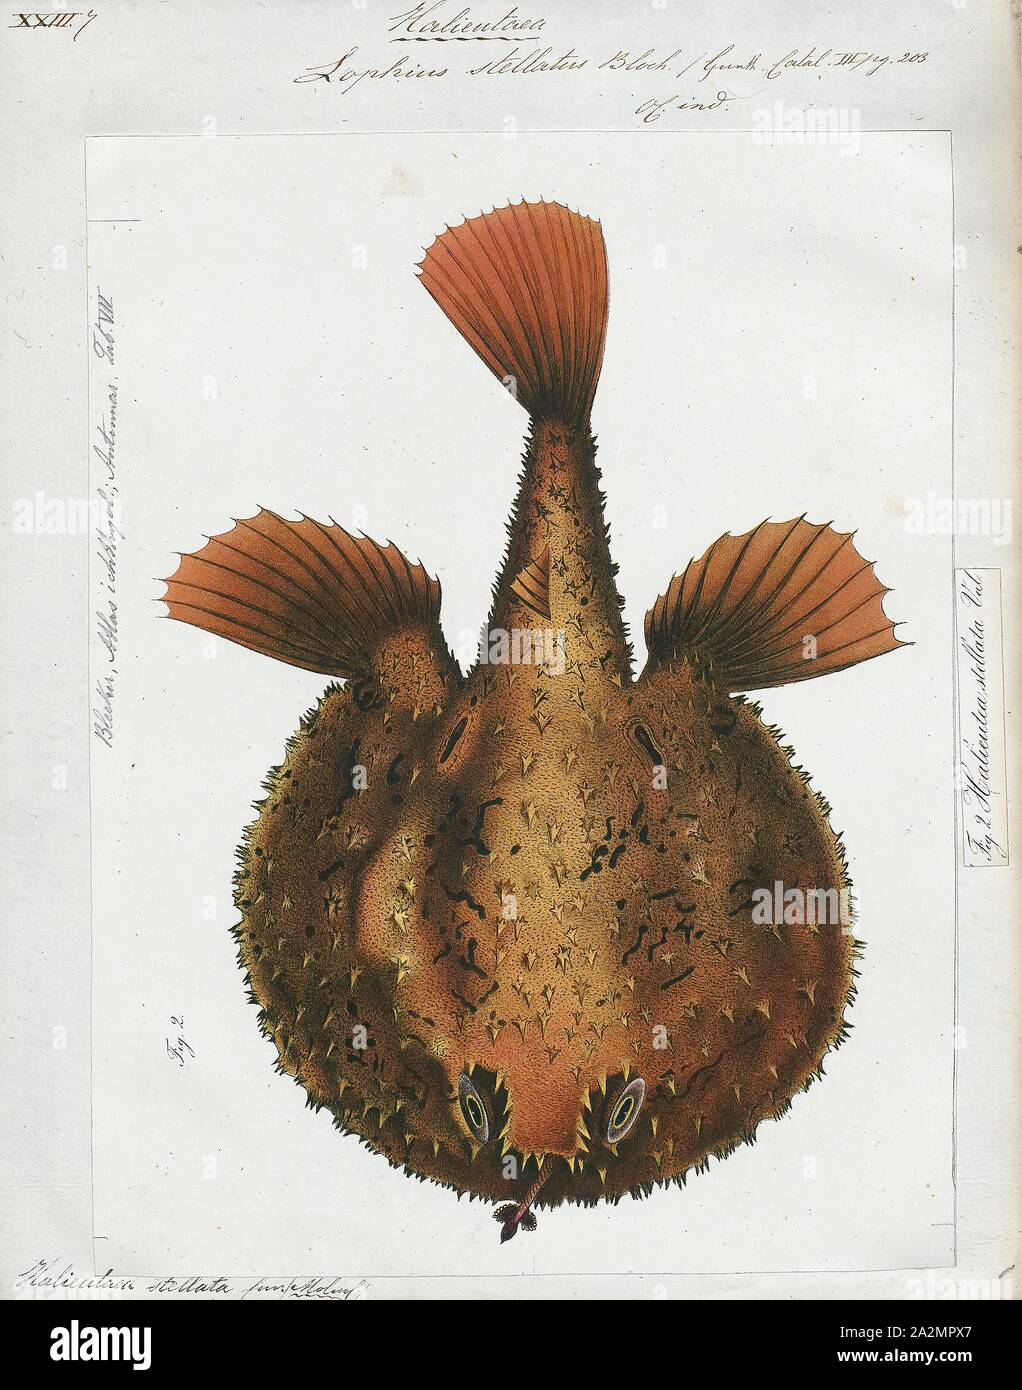 Halieutaea stellata, Print, The starry handfish, Halieutaea stellata, is a batfish of the family Ogcocephalidae found on the continental shelves of the Indo-Pacific oceans at depths of between 50 and 400 m. They are up to 30 cm long., upper part Stock Photo